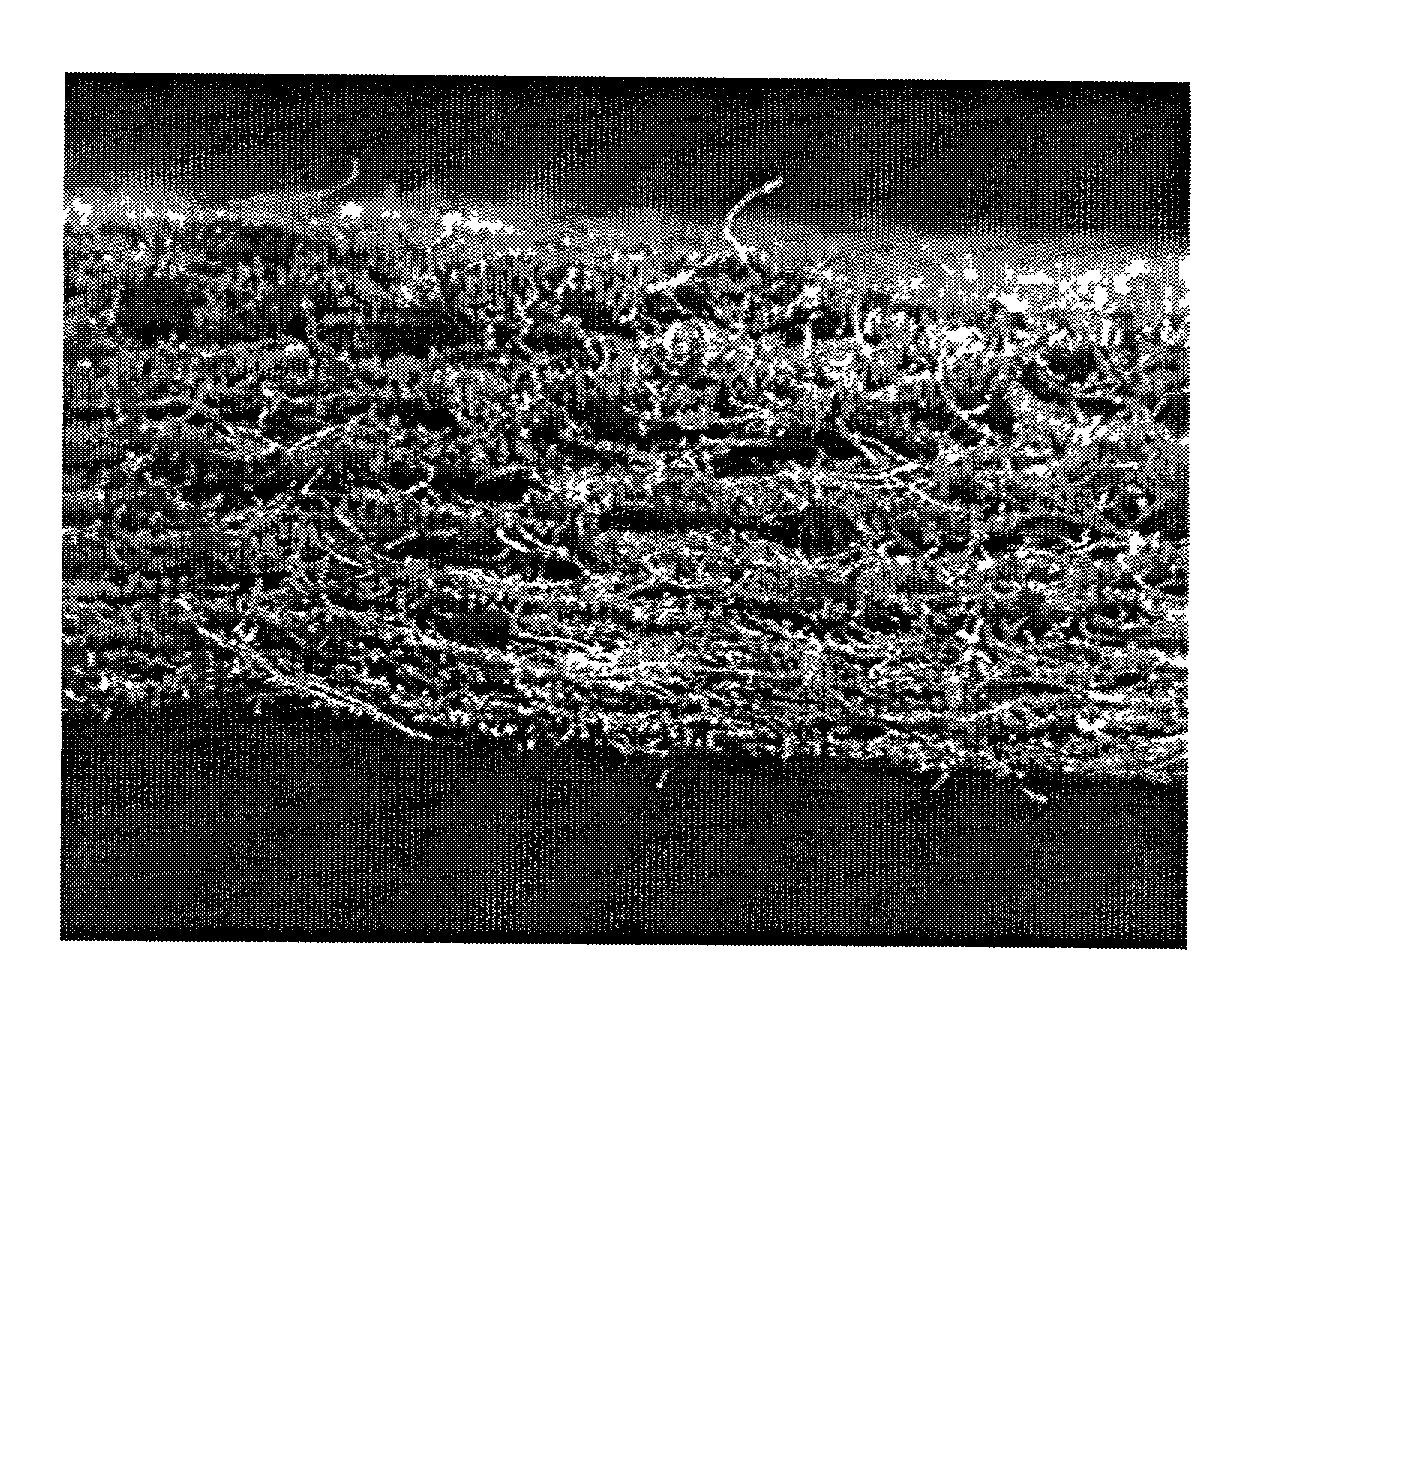 Method for controlling thermohysteresis during thermoforming of three-dimensional fibrous compound constructs and the product thereof